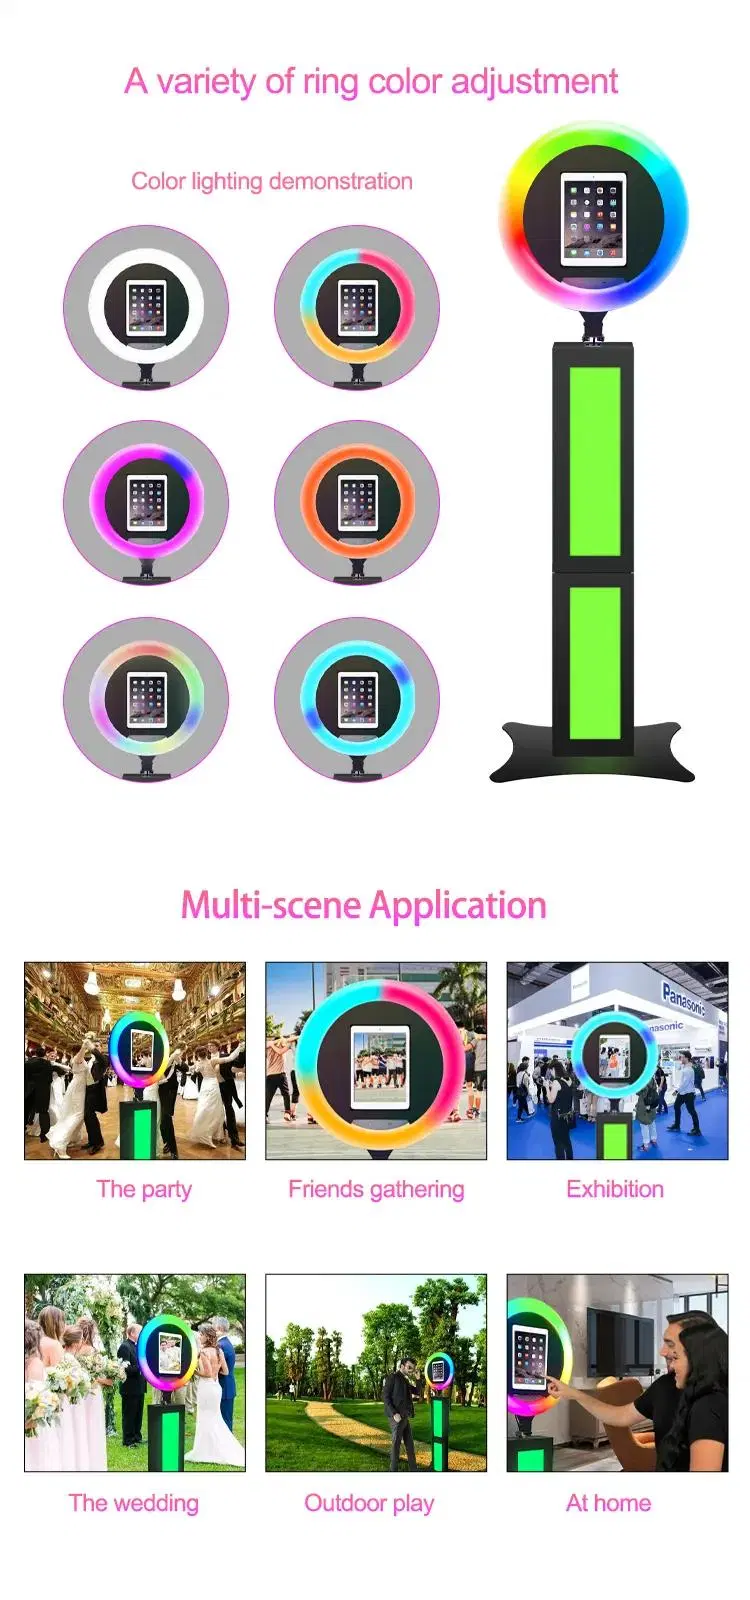 Hot Selling 12.9-Inch Portable Selfie Stand RGB LED Ring Light iPad Photo Booth